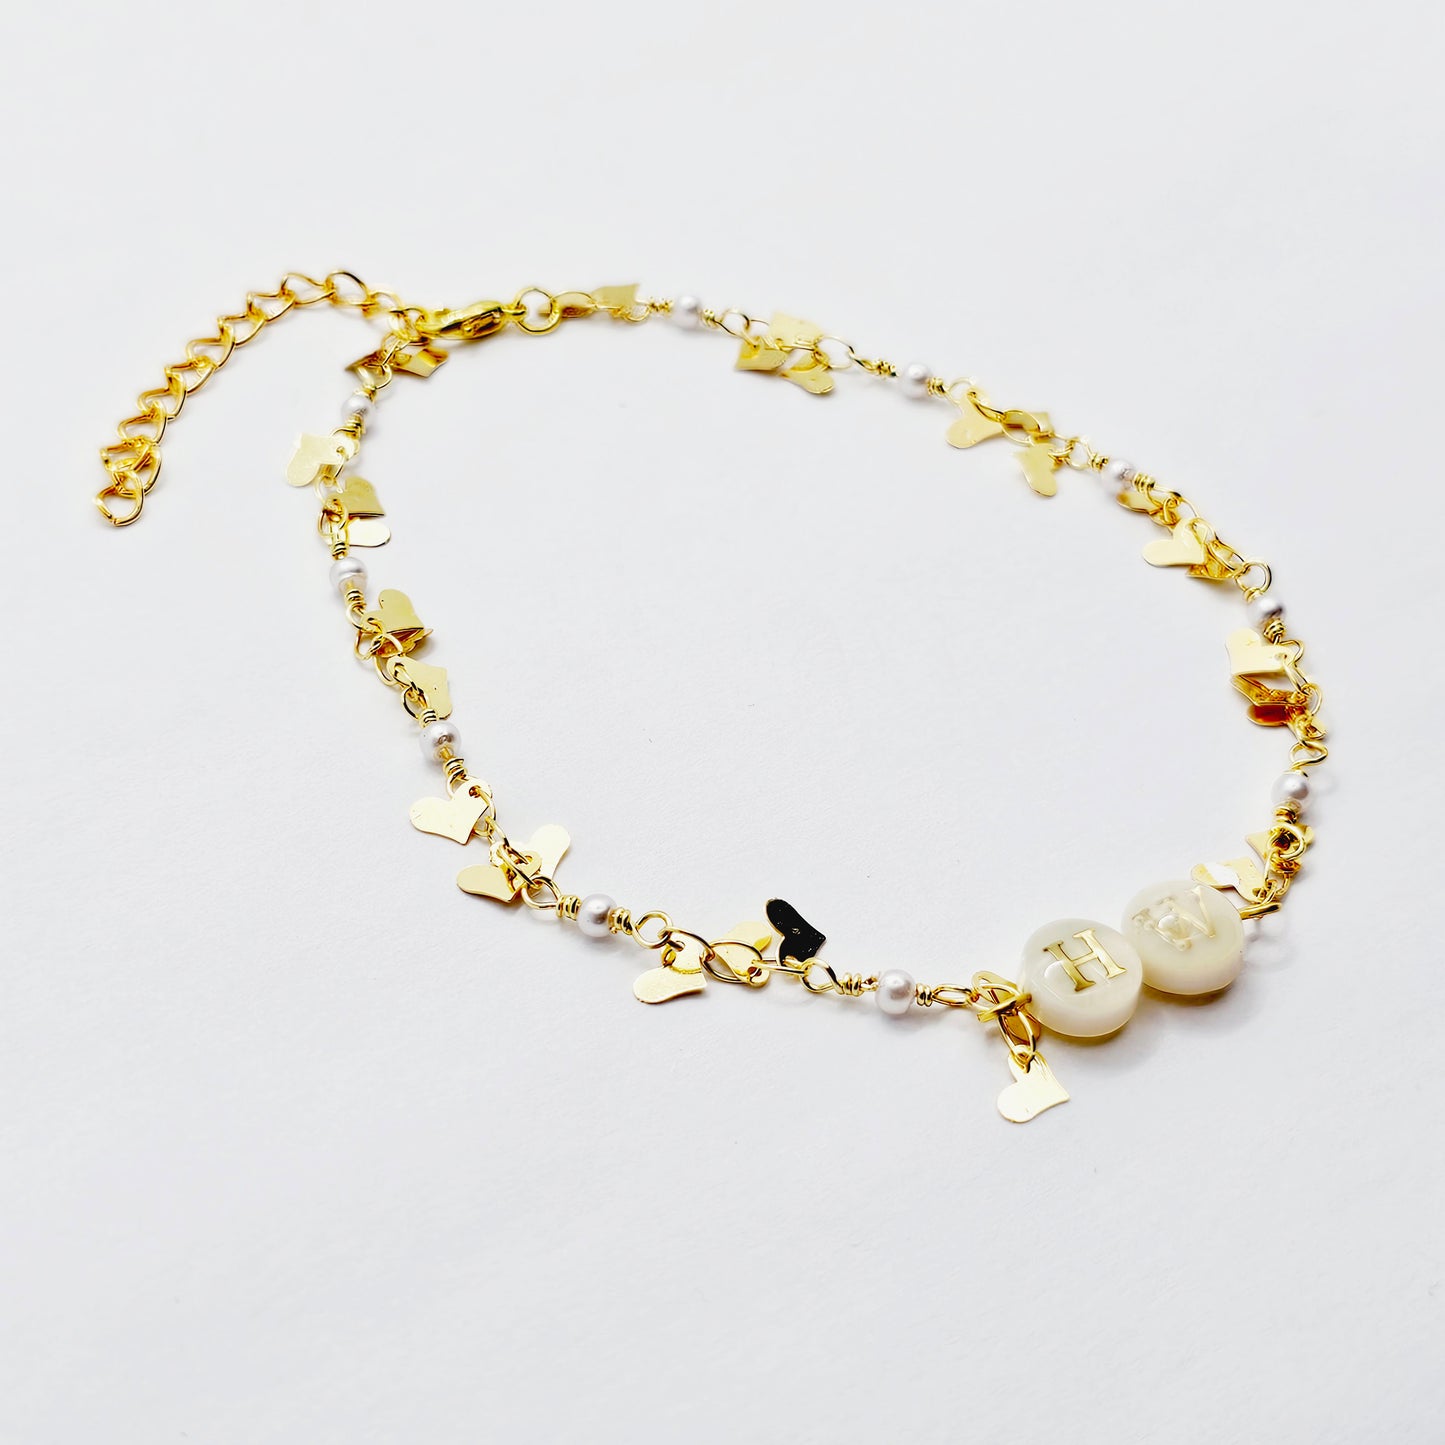 Gold Hotwife Anklet with Pearls and Hearts. Discreet HW for Hot Wife. Swinger Lifestyle